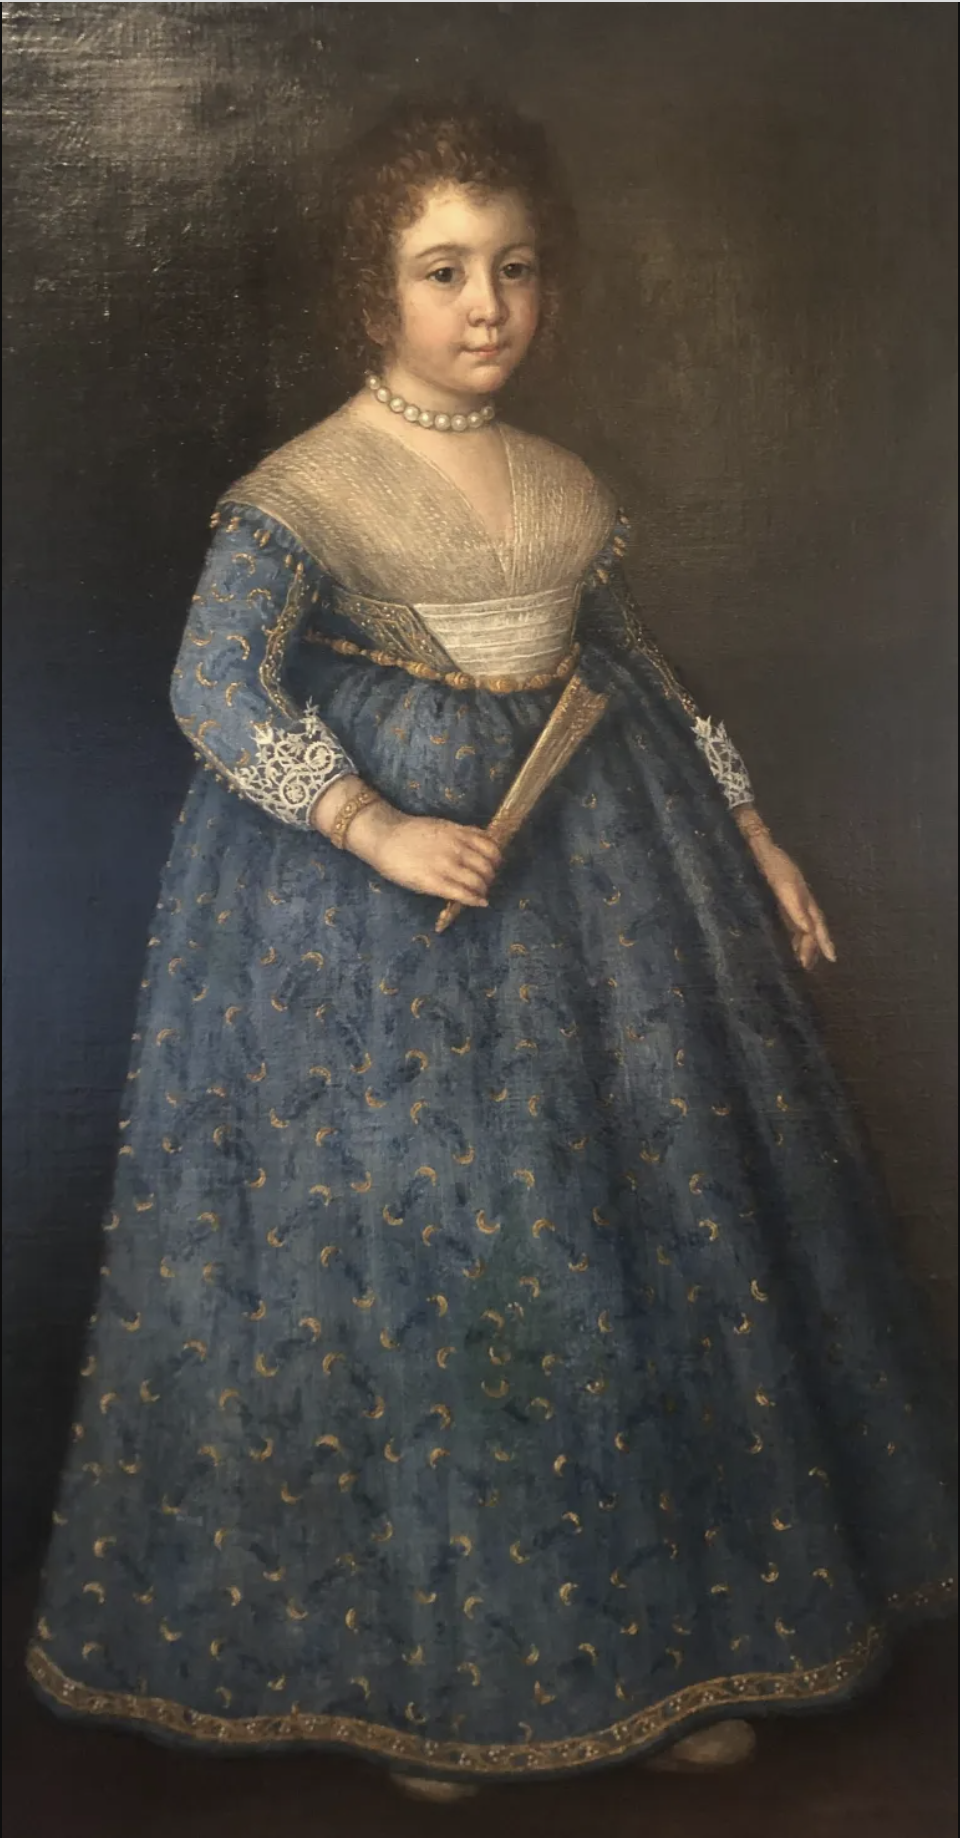 A full-length portrait of a girl wearing a blue dress with a sheer detail at the bust and lace at her sleeves. She wears a pearl necklace and has her curly brown hair pulled back. She holds a closed fan in her right hand. The background behind her is dark and neutral.